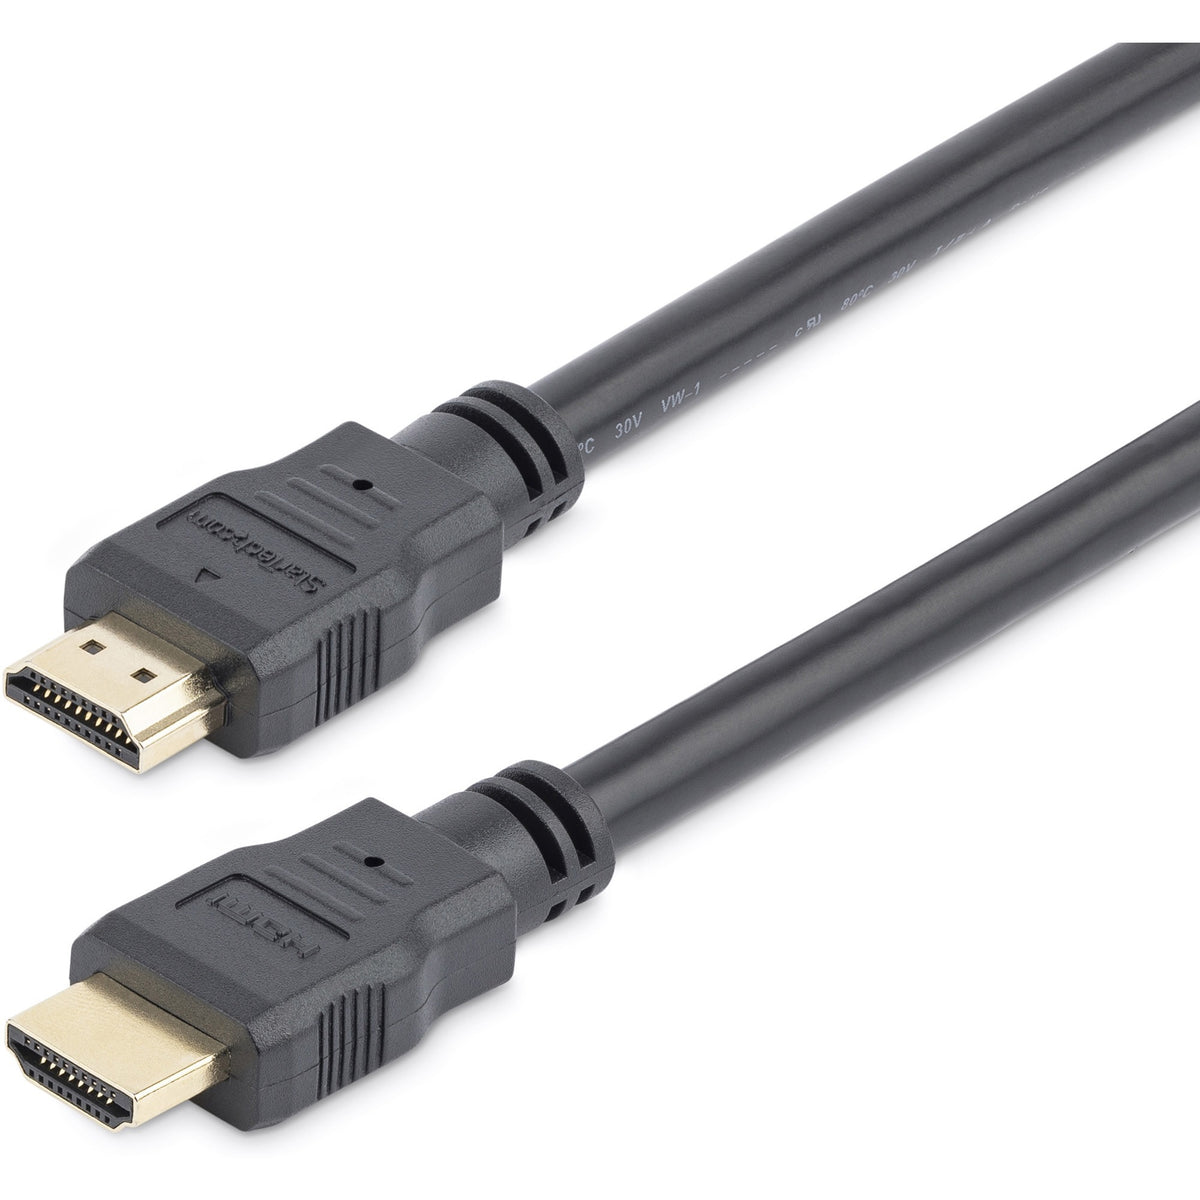 StarTech.com 0.3m (1ft) Short High Speed HDMI Cable - Ultra HD 4k x 2k HDMI Cable - HDMI to HDMI M/M - HDMM30CM